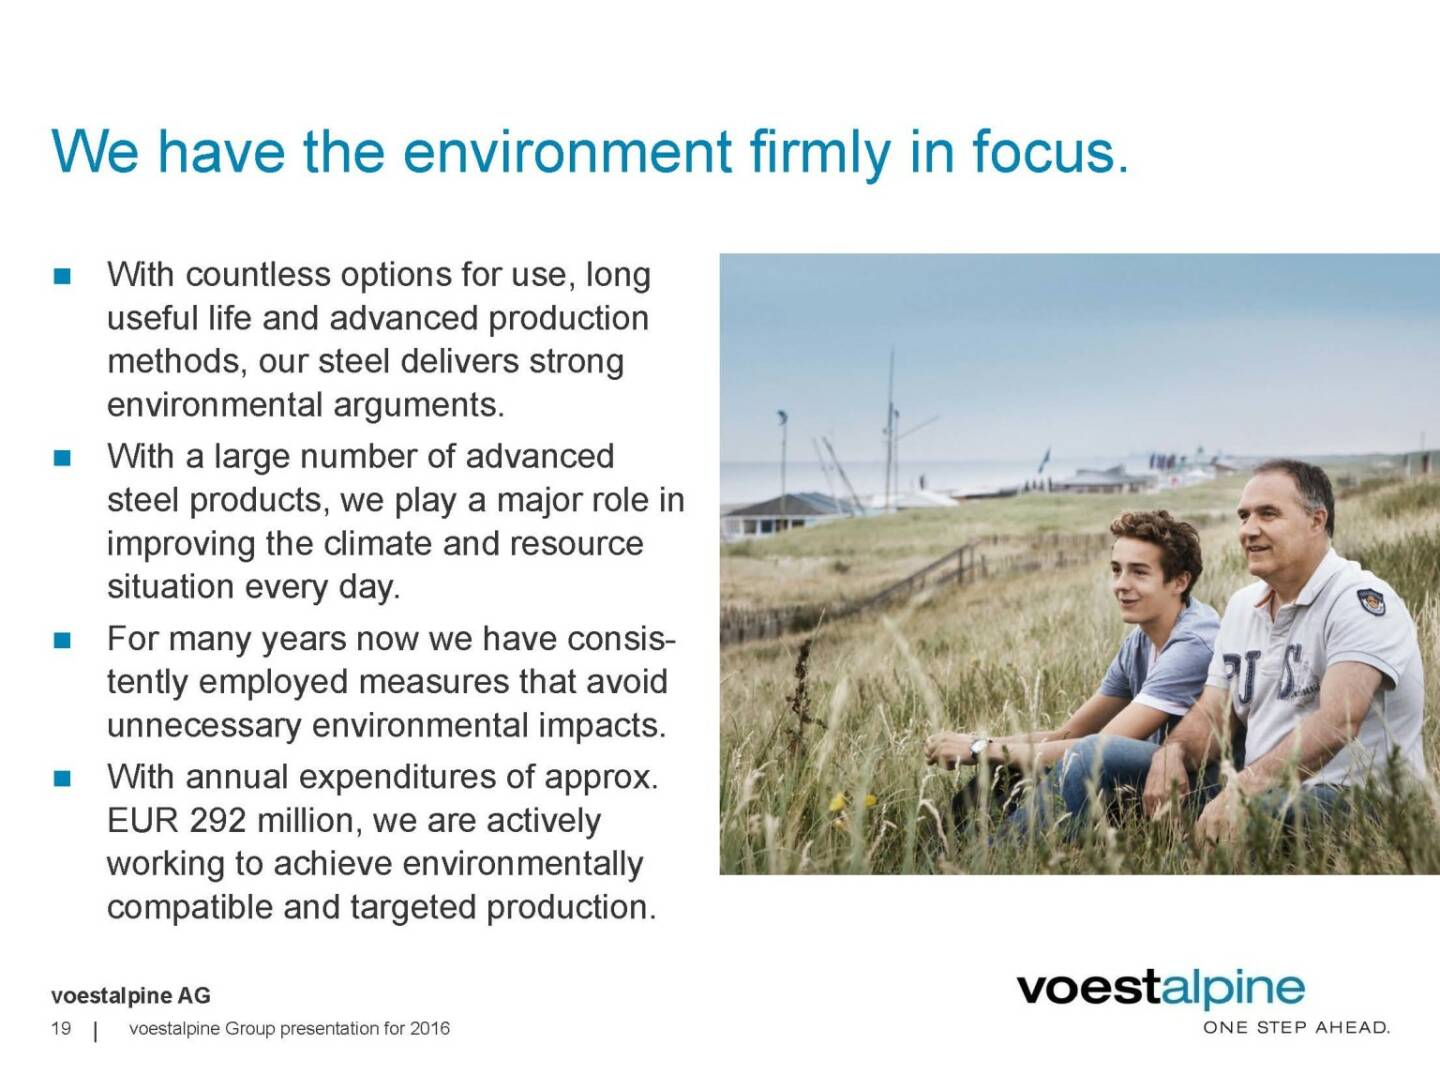 voestalpine - We have the environment firmly in focus